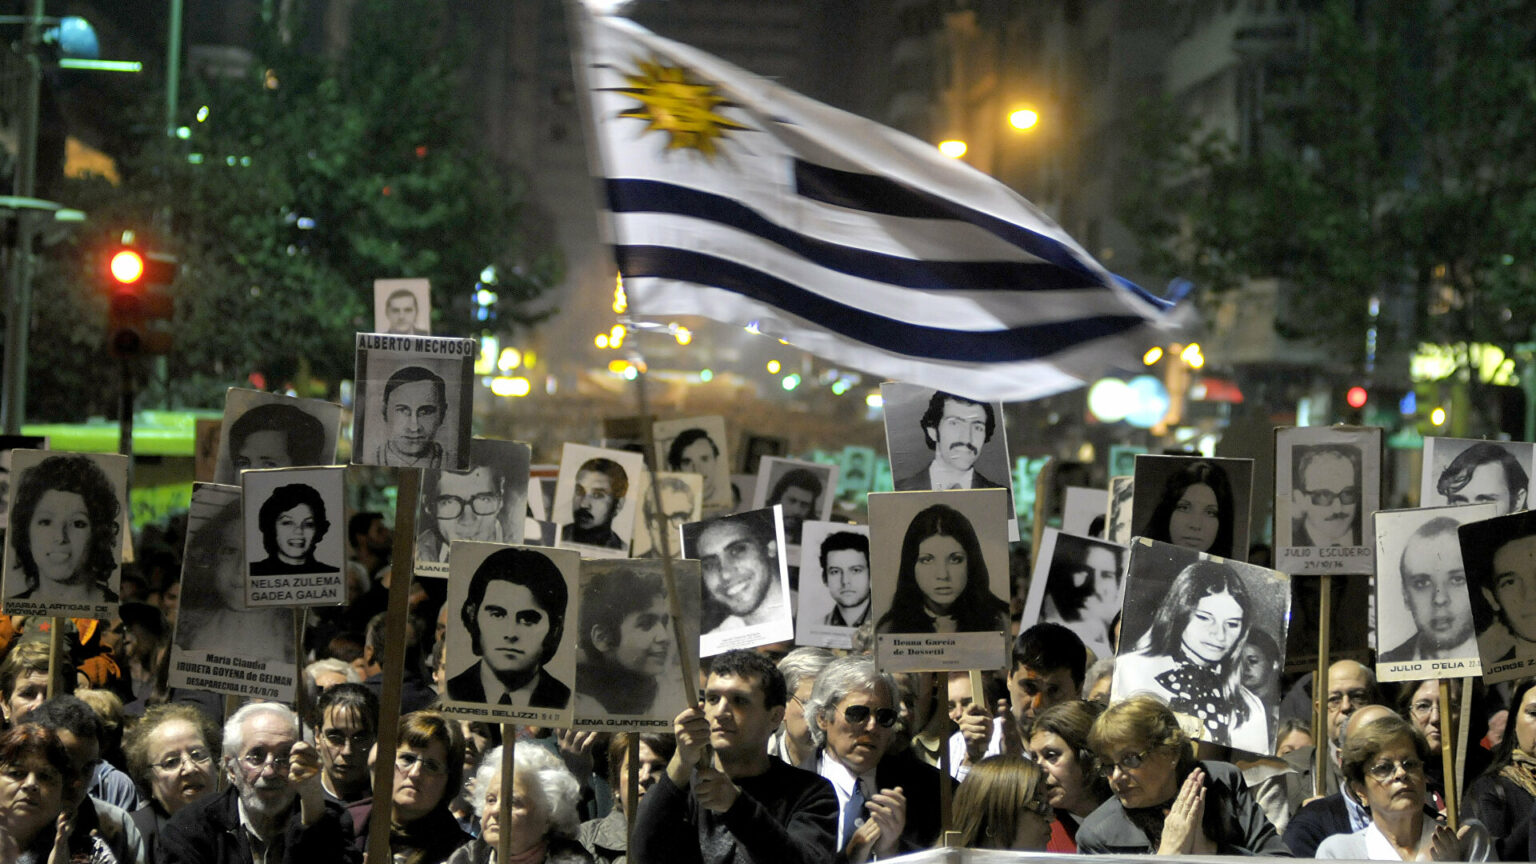 Relatives of disappeared take a stand in Uruguay